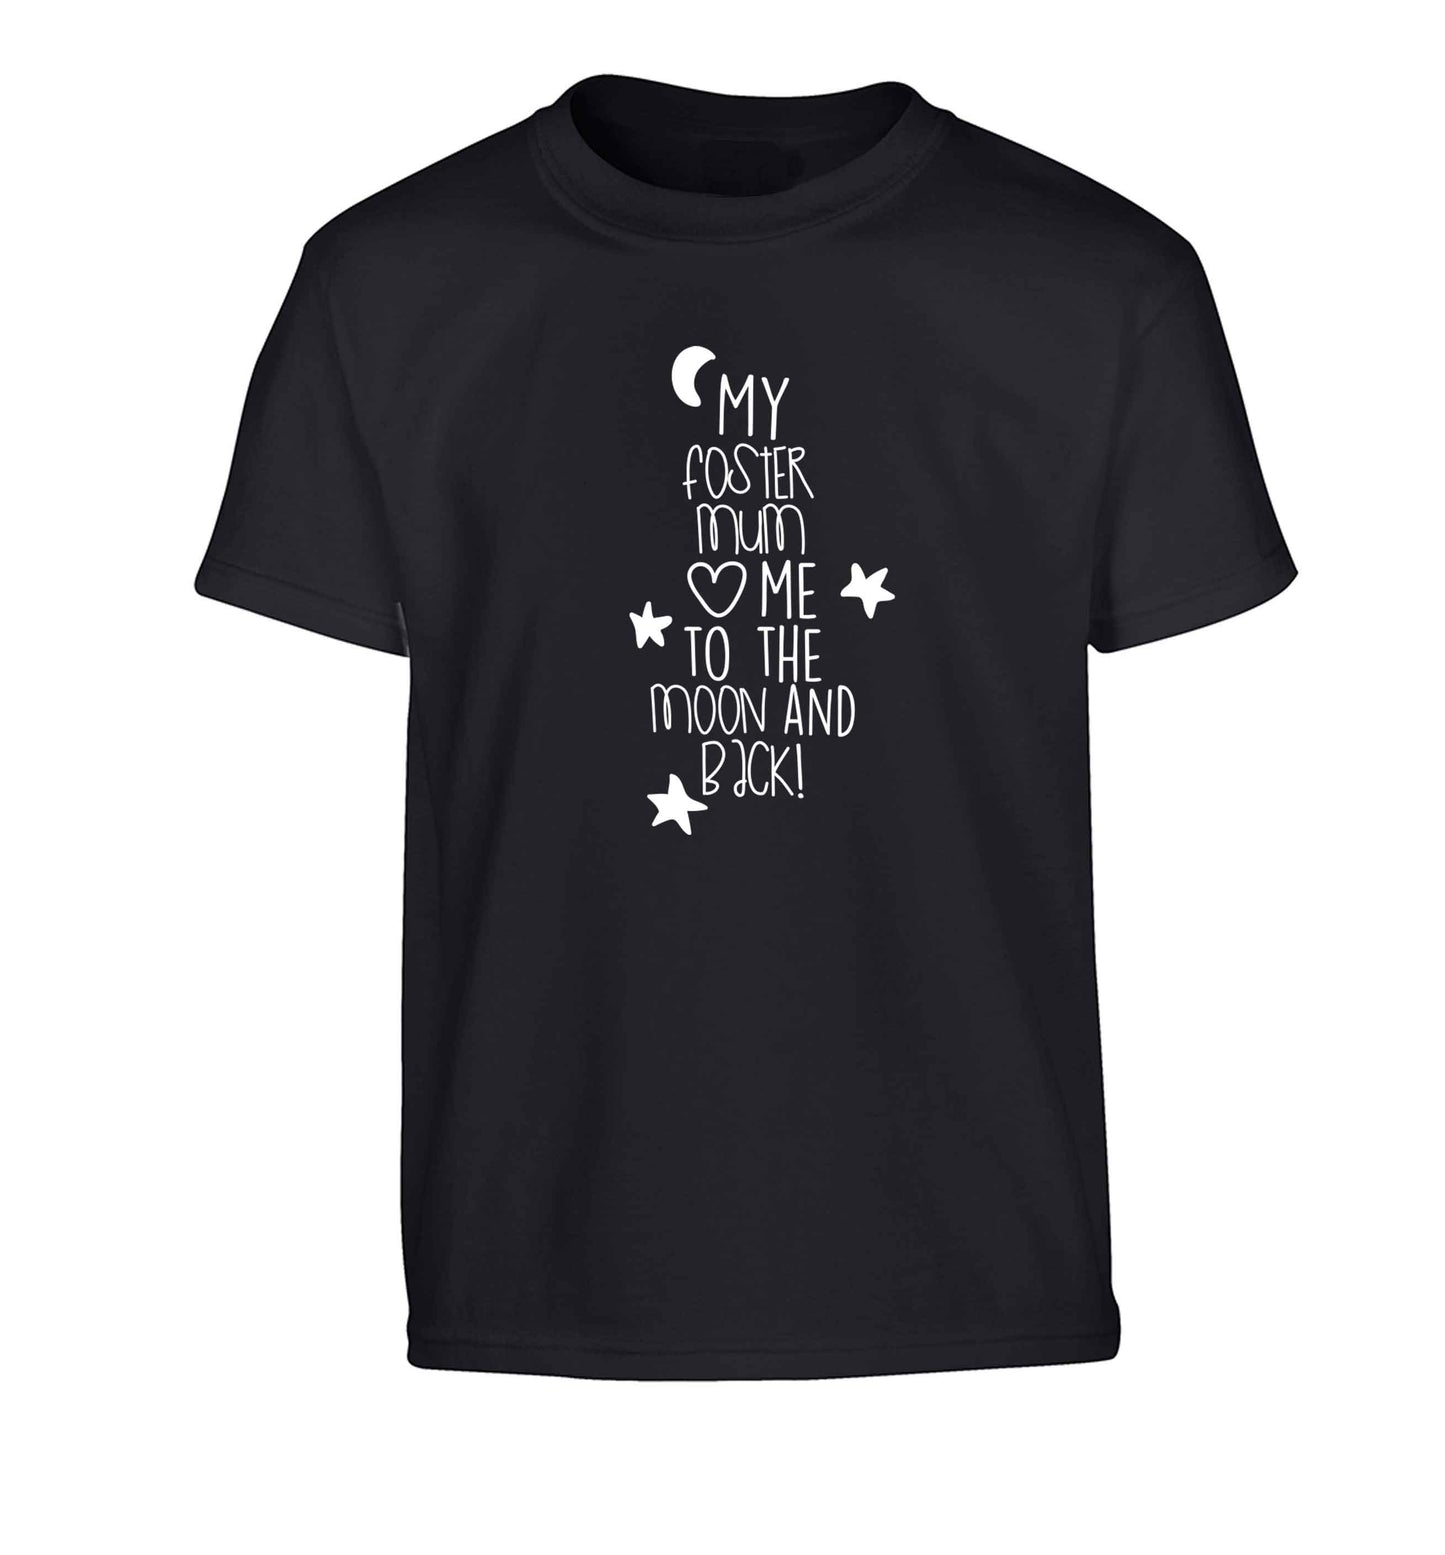 My foster mum loves me to the moon and back Children's black Tshirt 12-13 Years